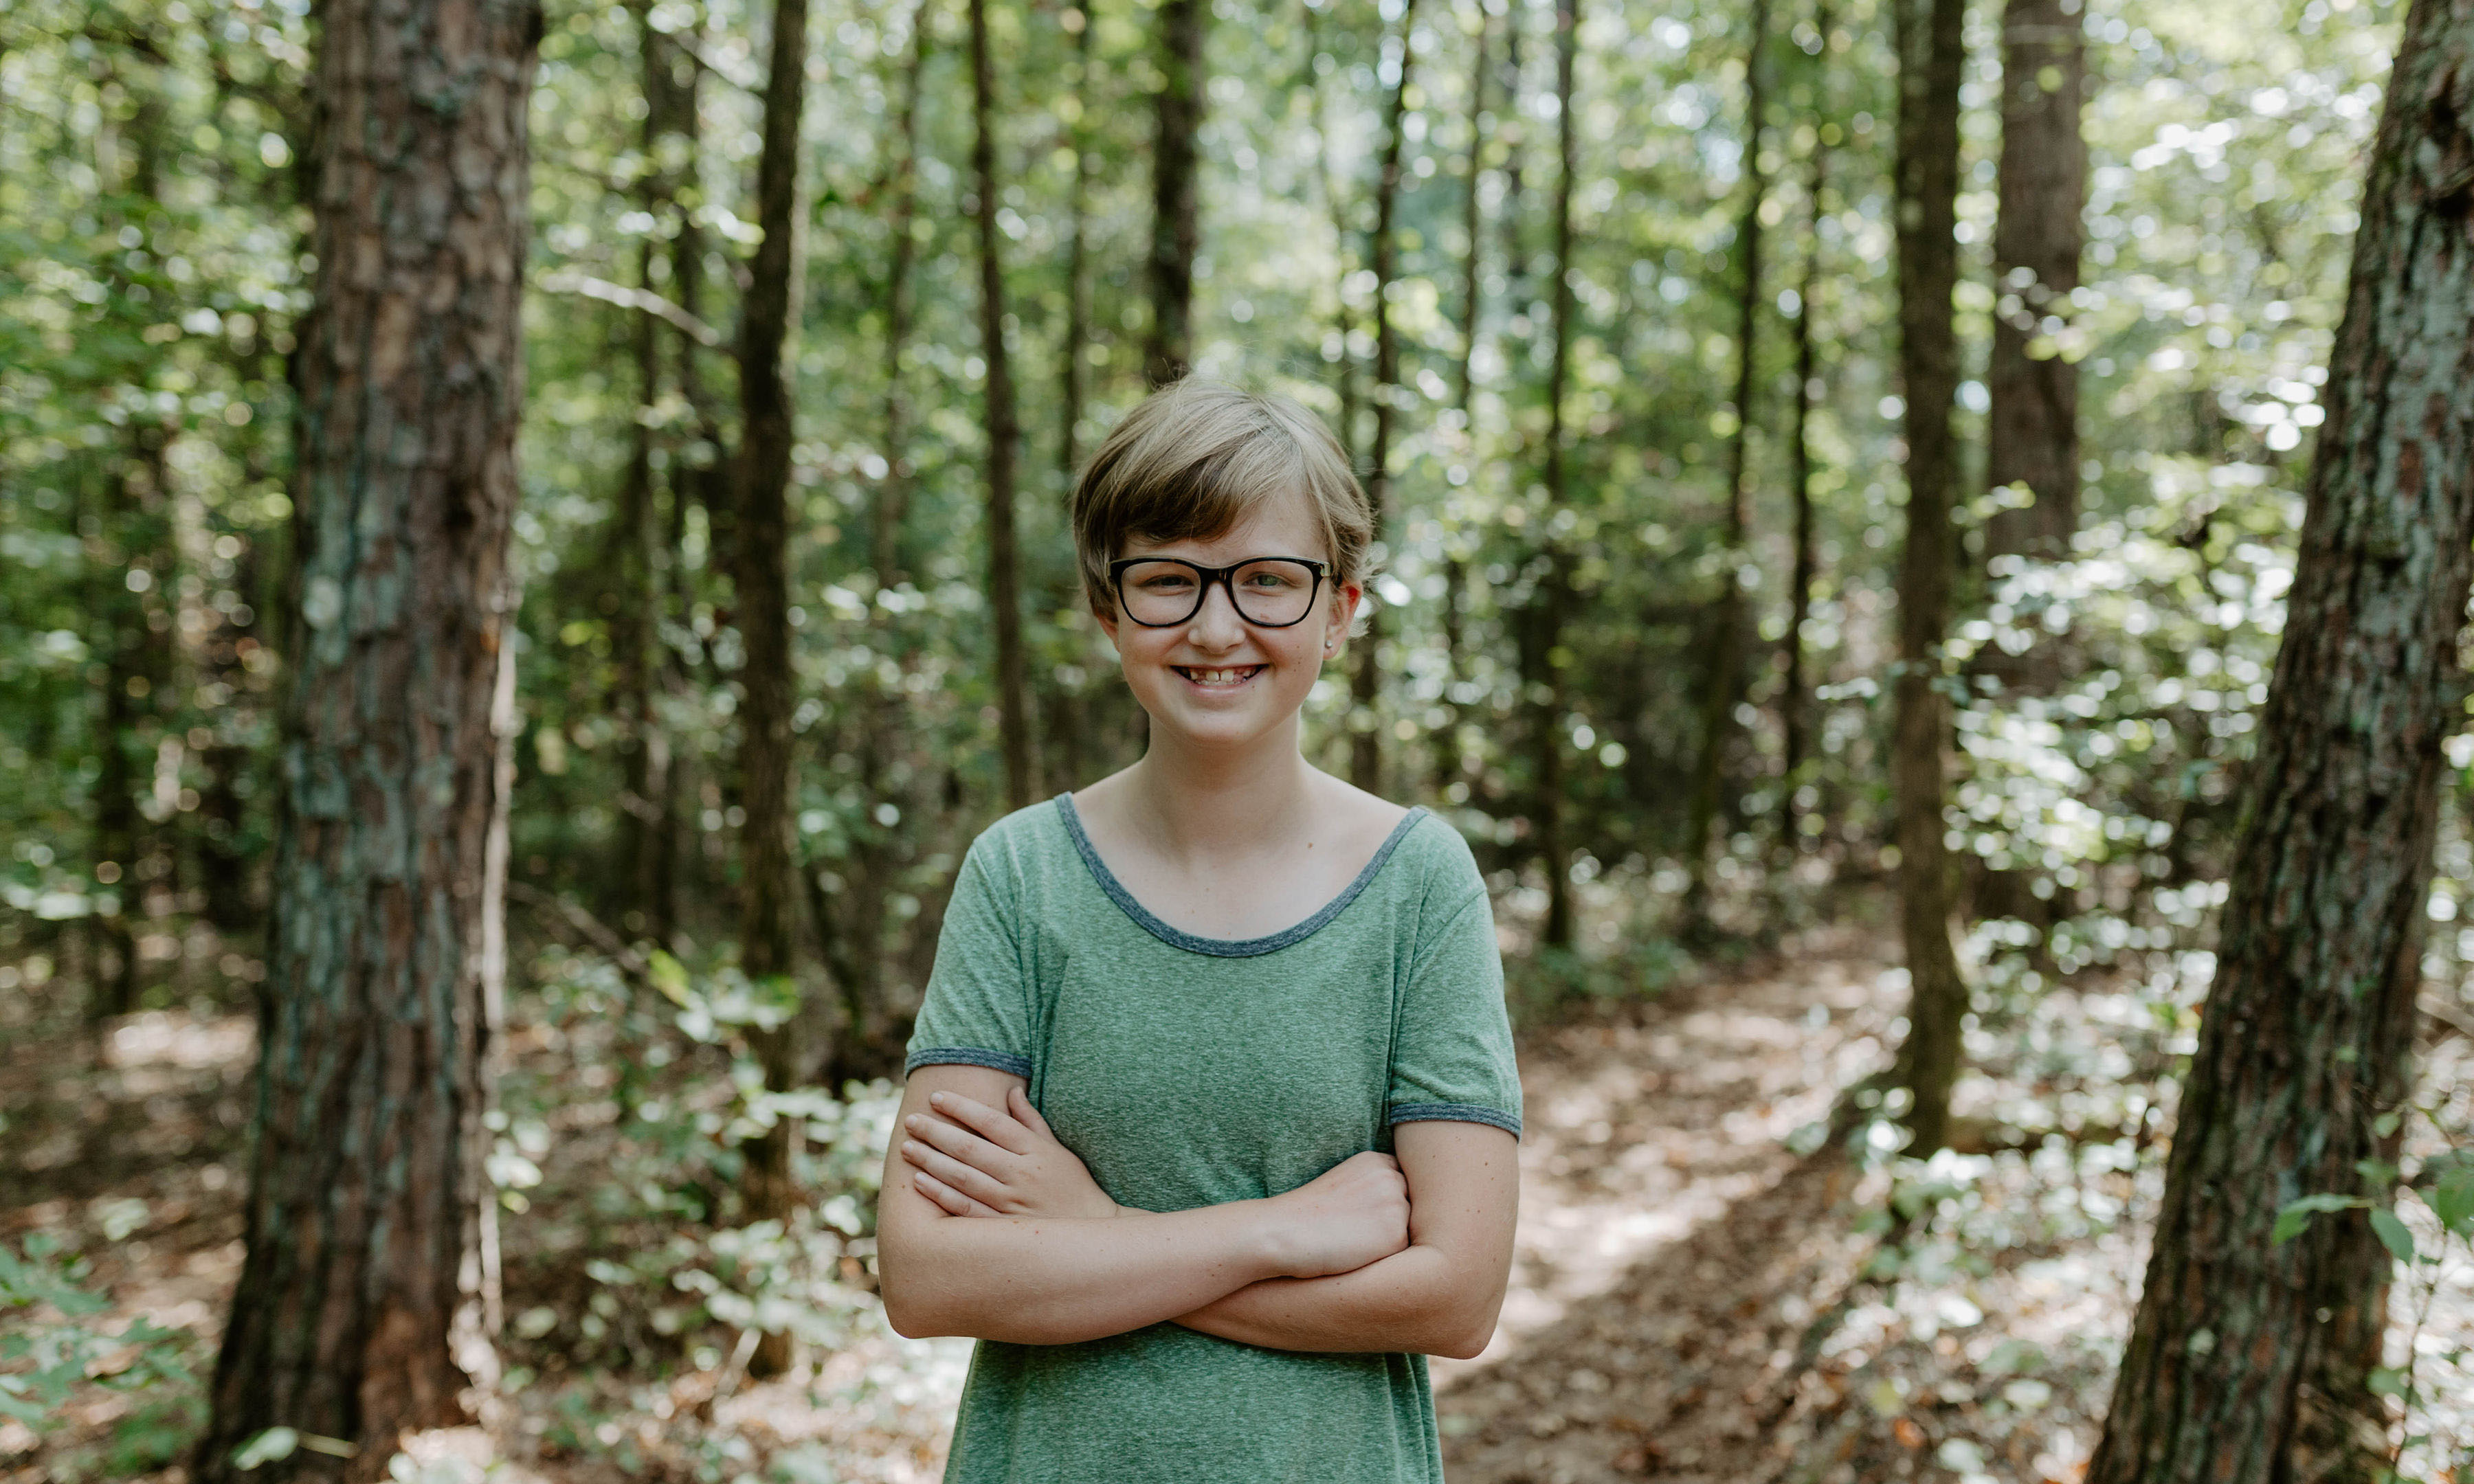 Lillian Hollis is a seventh grader in Greenville County. Photo by Morgan Yelton